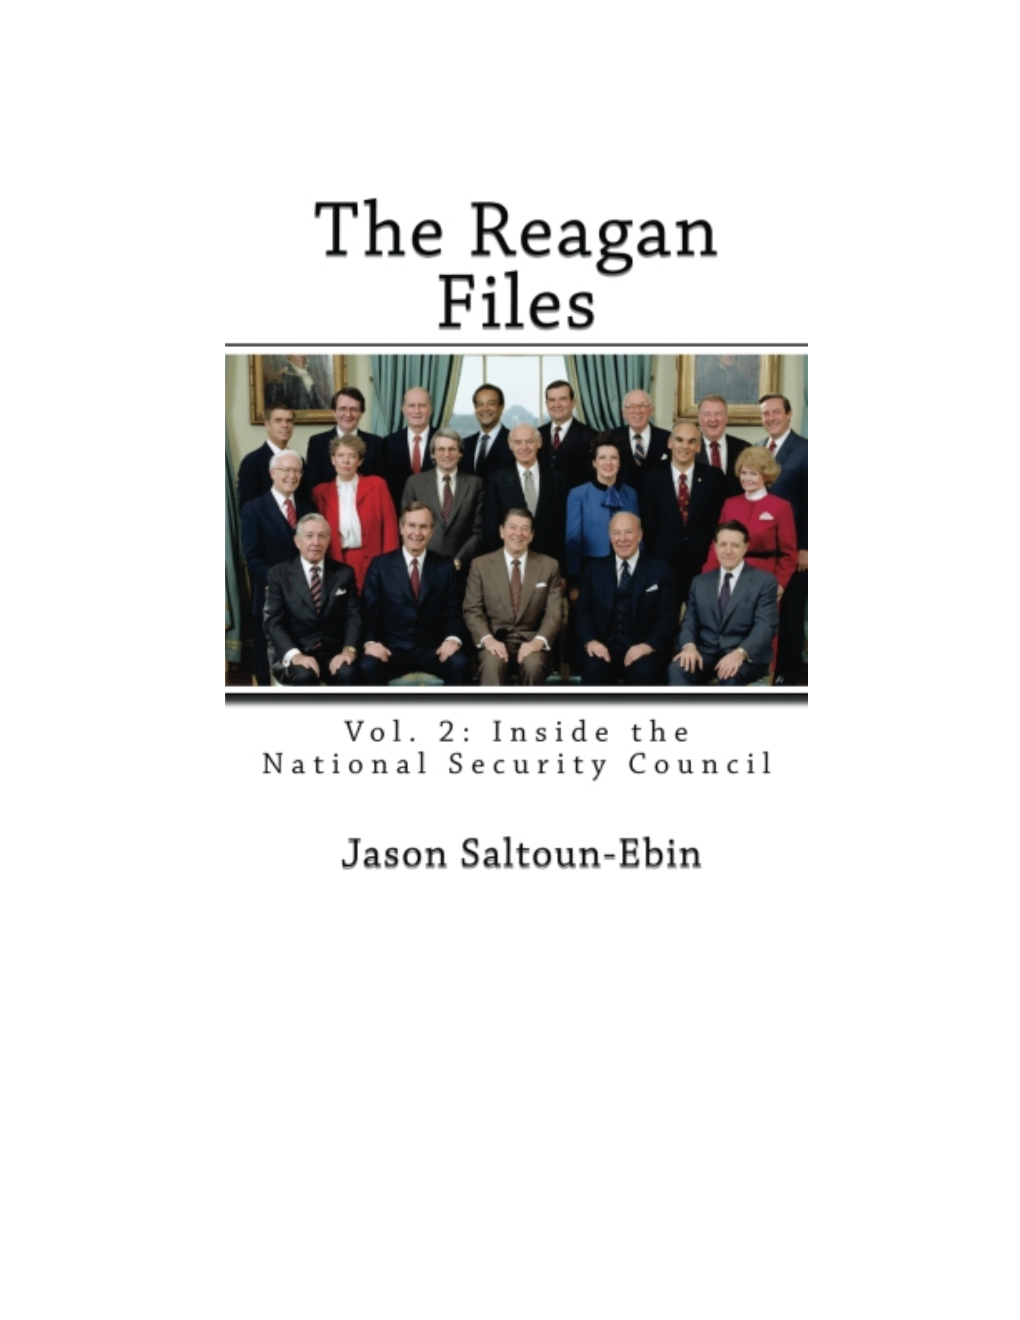 Chapter One Implementing the Reagan Agenda